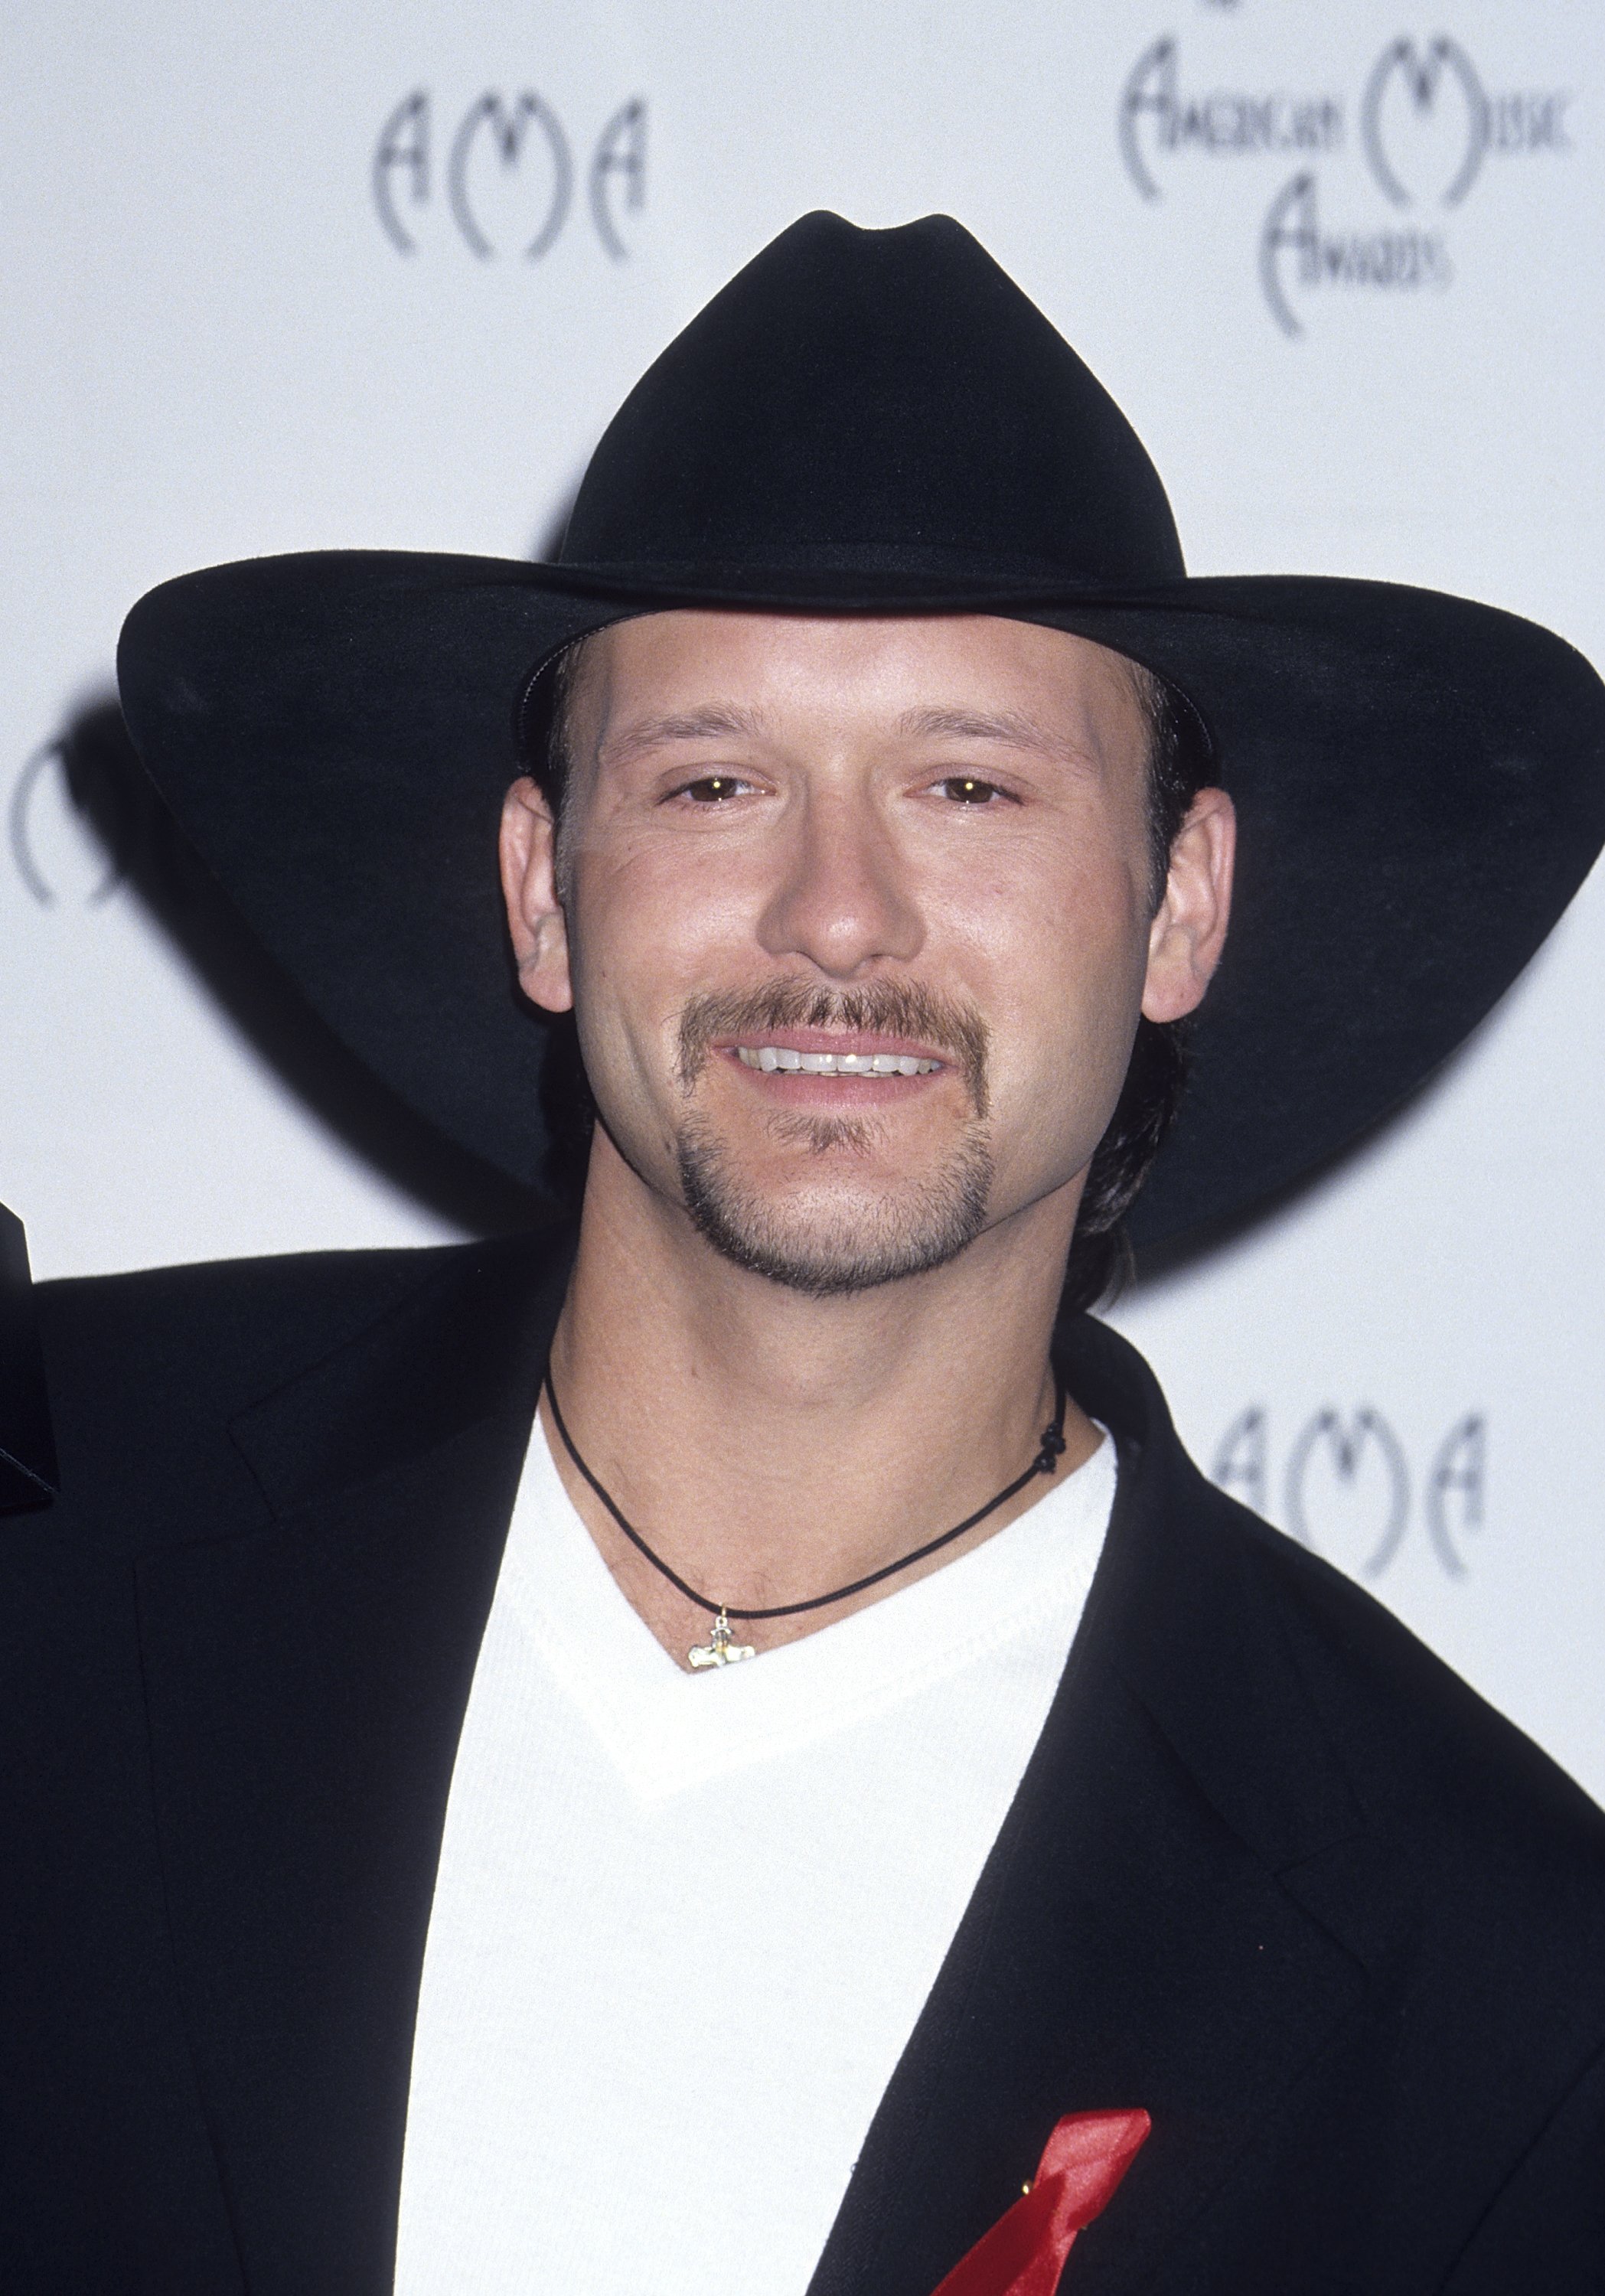 Singer Tim McGraw attends the 22nd Annual American Music Awards on January 30, 1995 at the Shrine Auditorium in Los Angeles, California. | Source: Getty Images